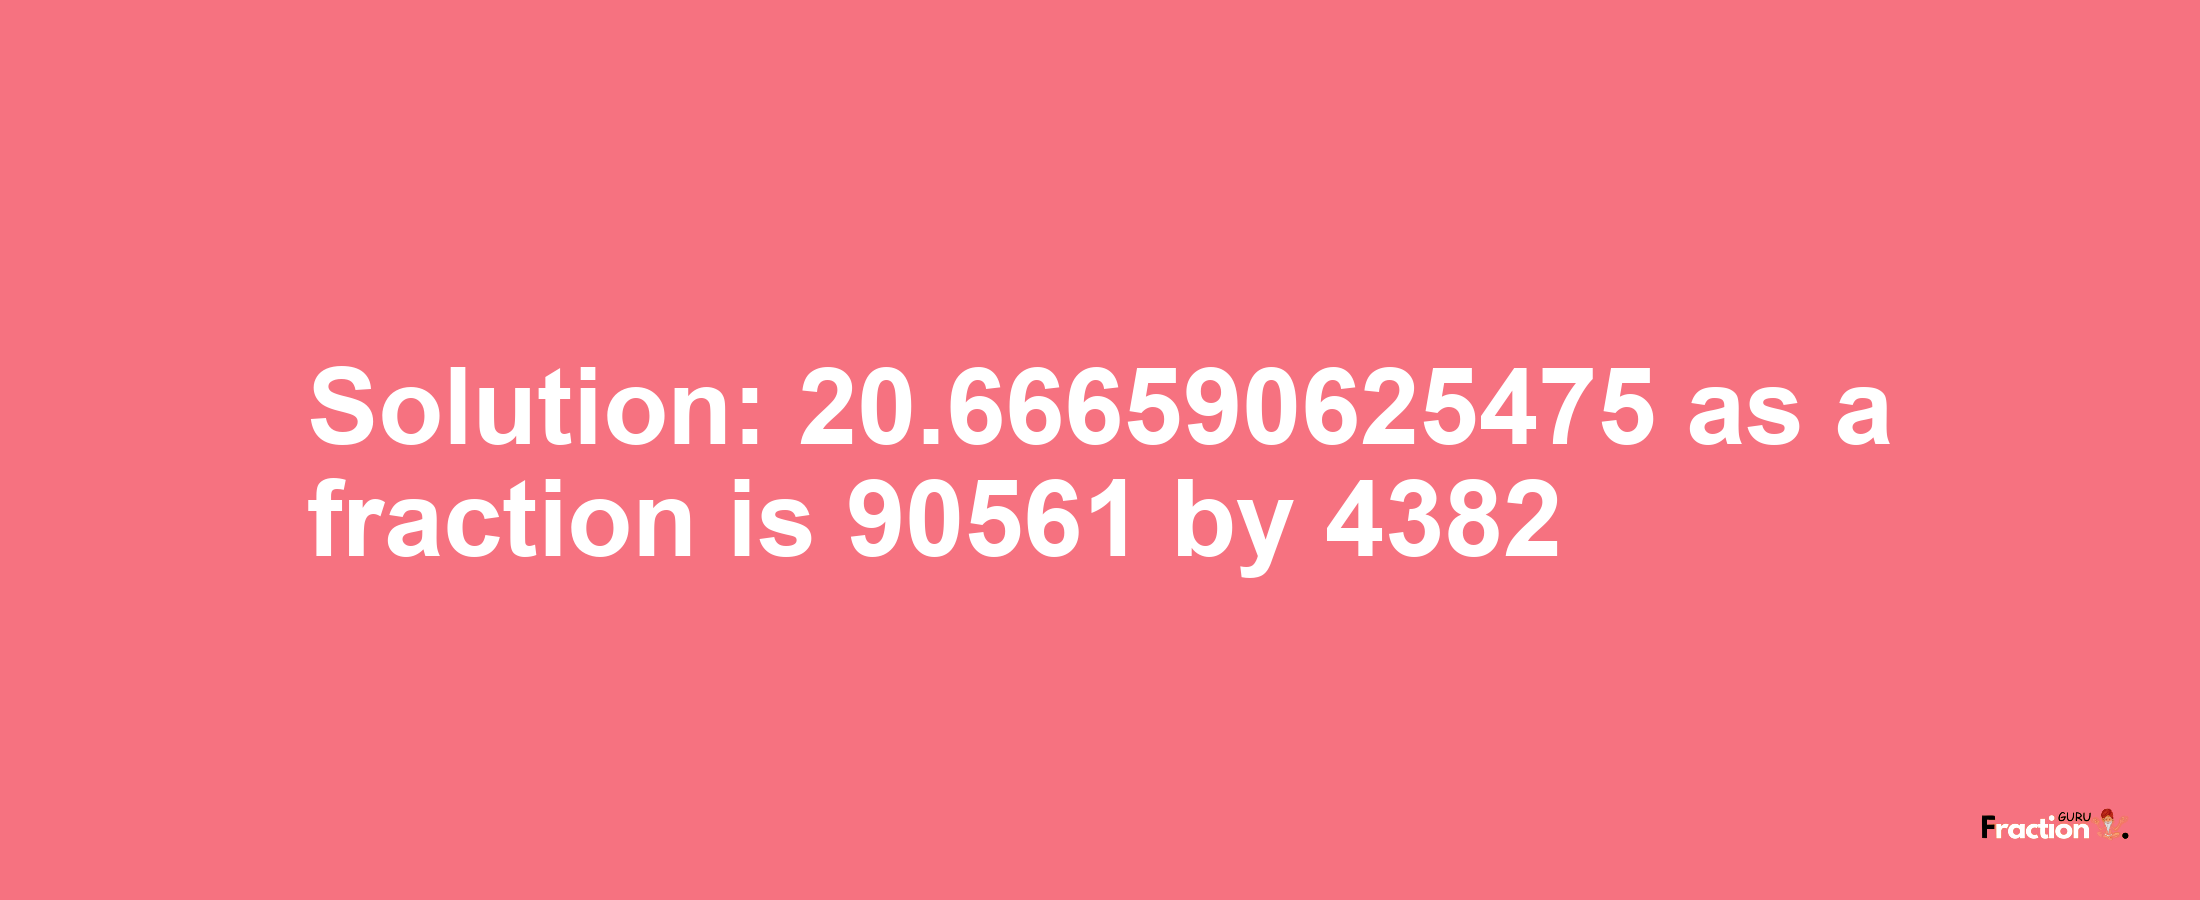 Solution:20.666590625475 as a fraction is 90561/4382